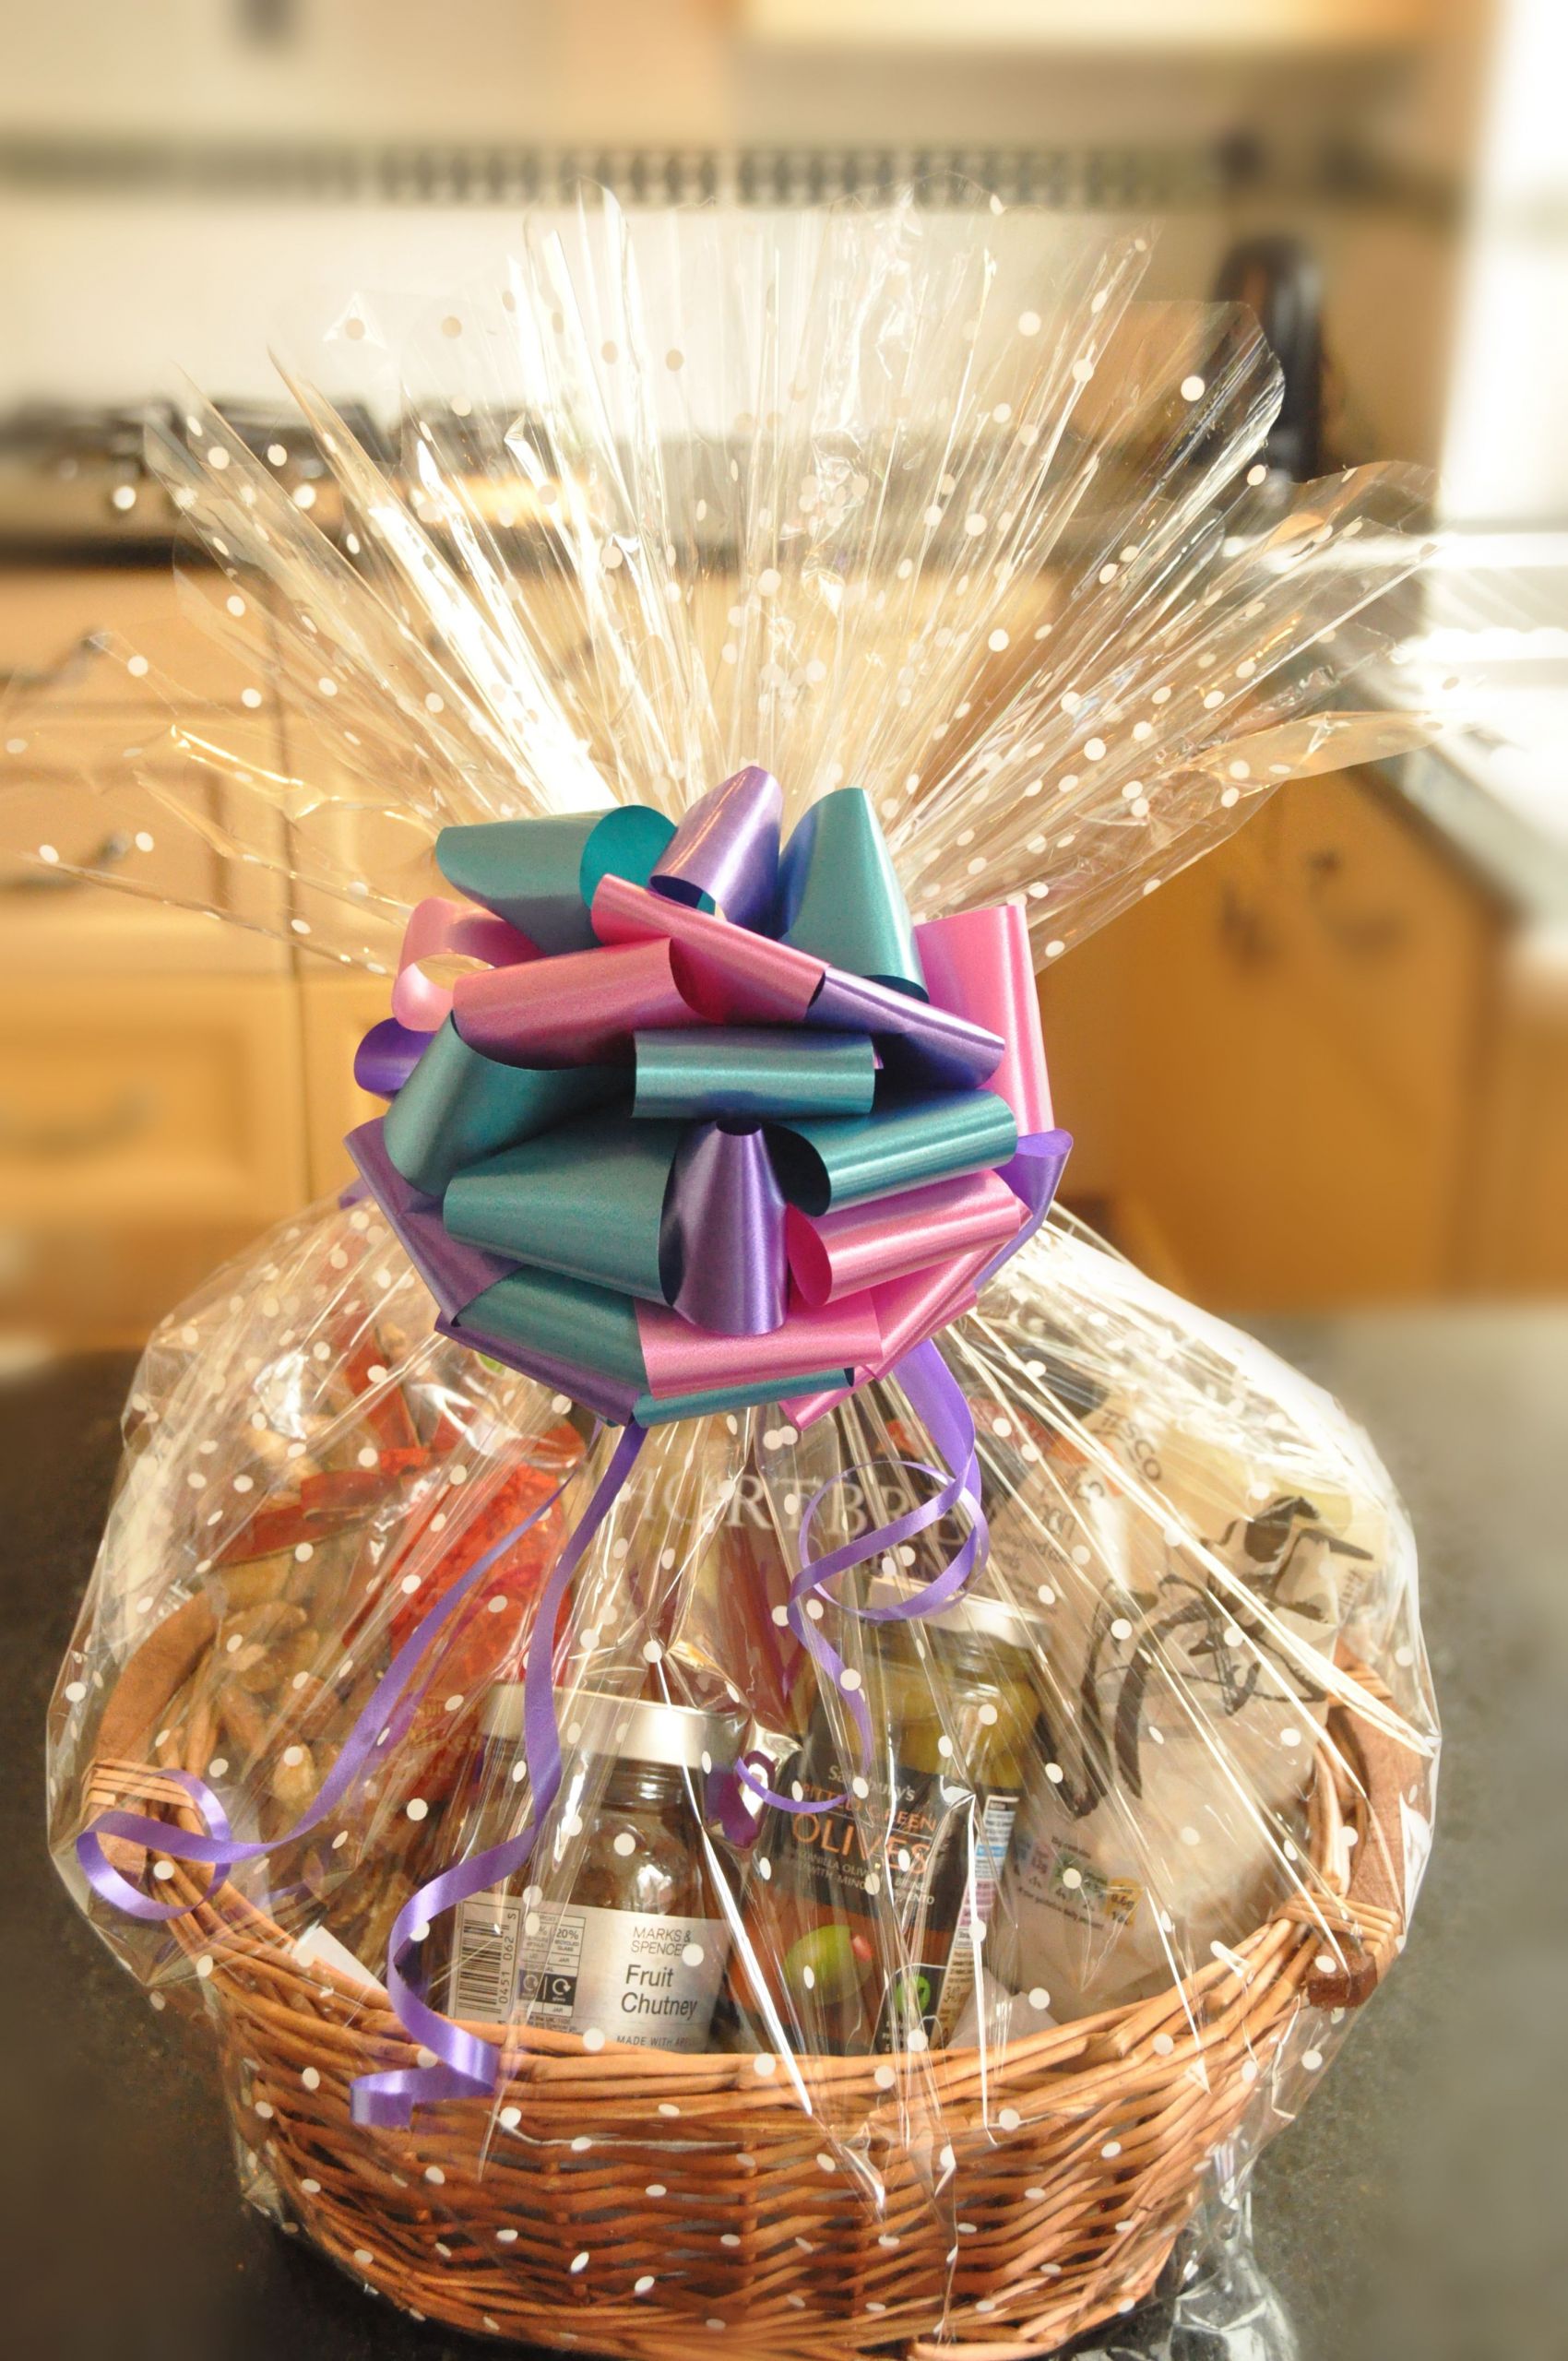 Gift Basket Wrapping Ideas
 Hampers & t baskets create your own luxury baskets